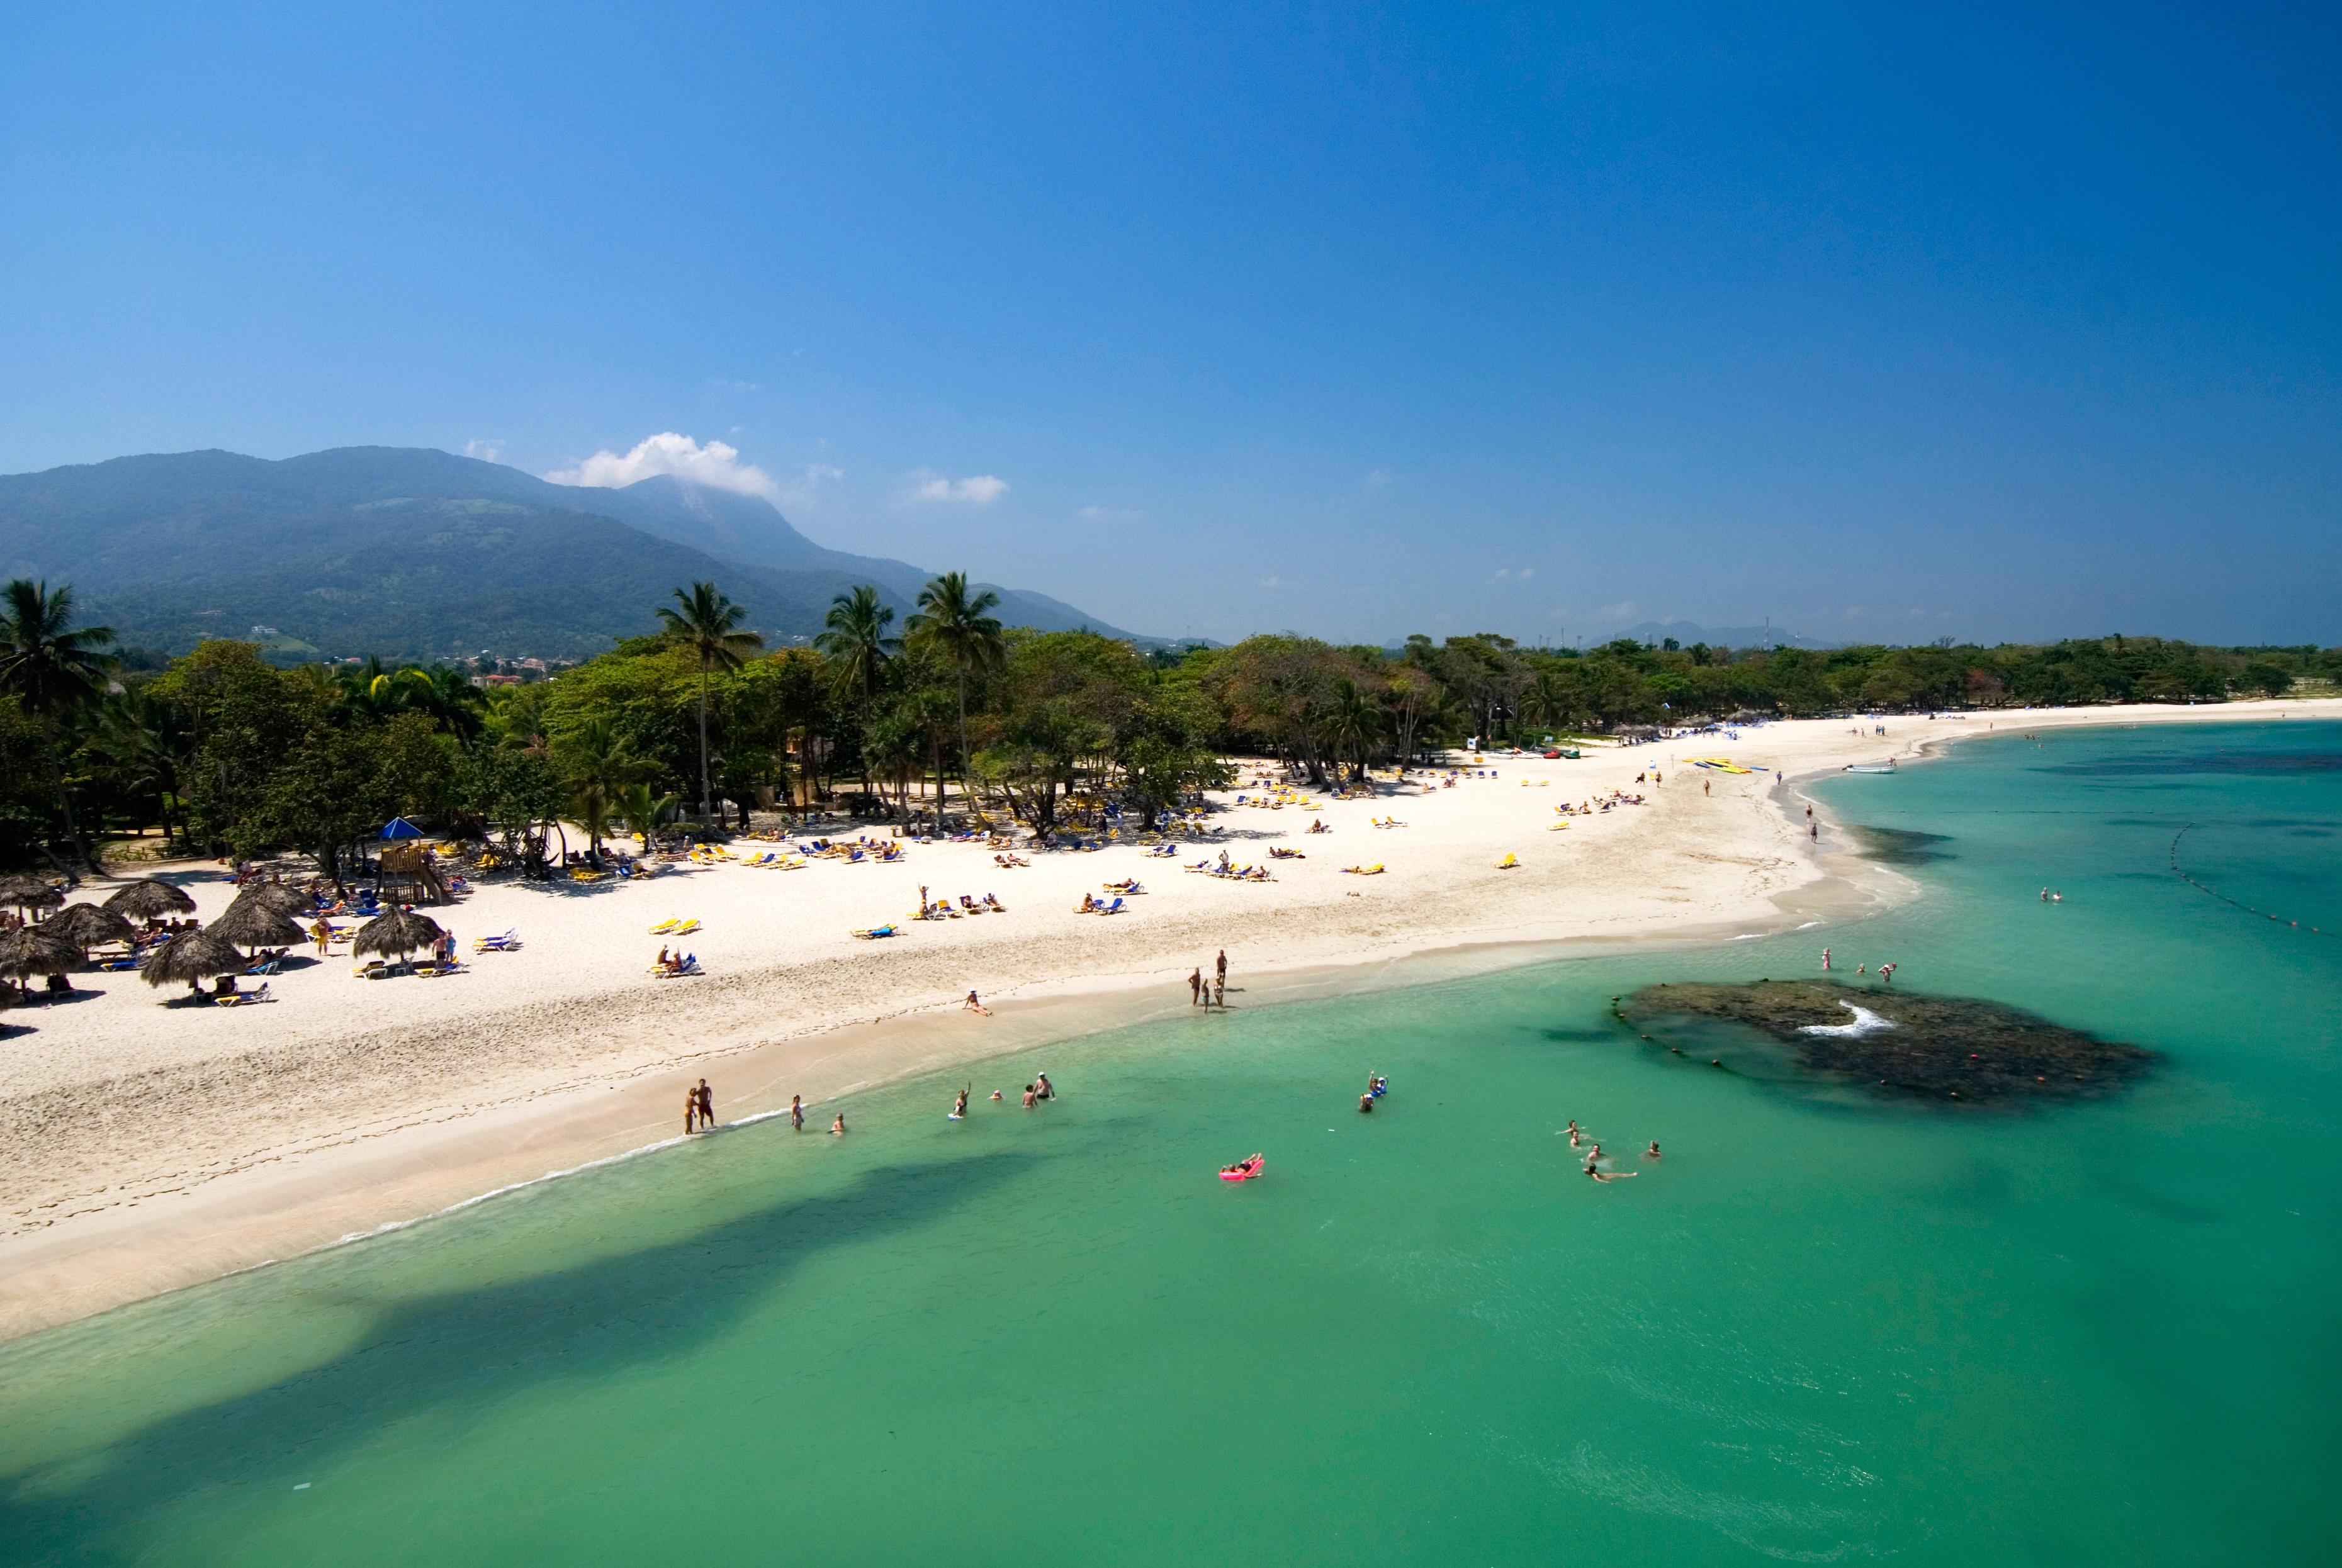 Beach in front of the Iberostar / Coral Marien Hotels, Puerto Plata.